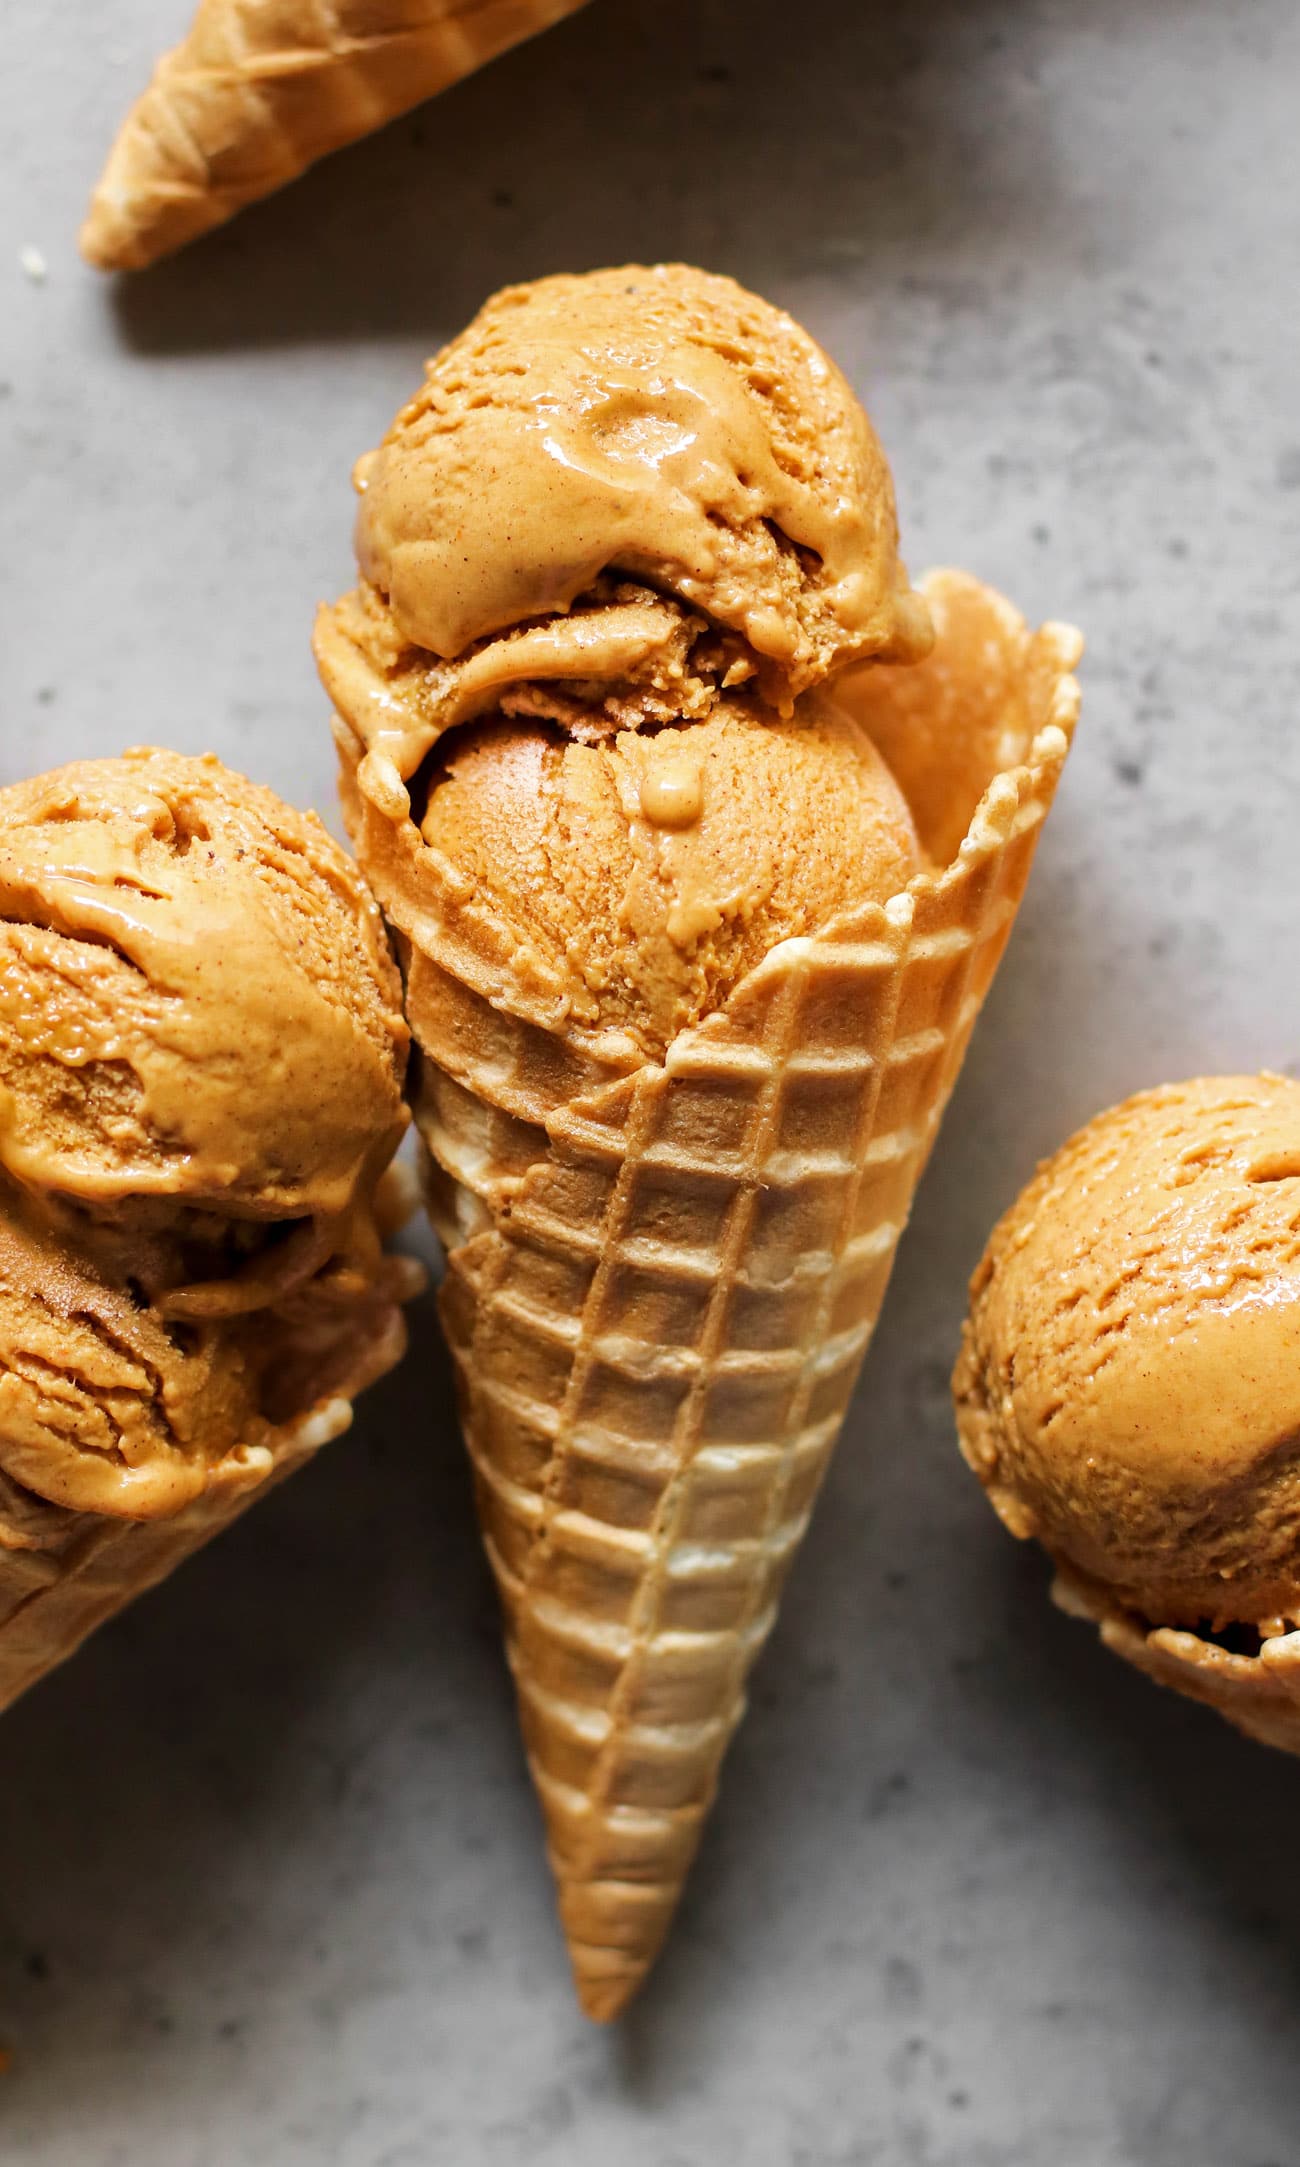 This Healthy Pumpkin Ice Cream is ULTRA creamy, perfectly spiced, and sweet enough to satisfy your sweet tooth. Best of all, it's made with 100% good-for-you ingredients! No heavy cream, no eggs, and no refined sugar! Instead, this version is low fat, refined sugar free, high protein, and gluten free too! #pumpkin #pumpkinpiespice #allnatural #refinedsugarfree #healthyicecream #highprotein #lowfat #easy #homemadeicecream